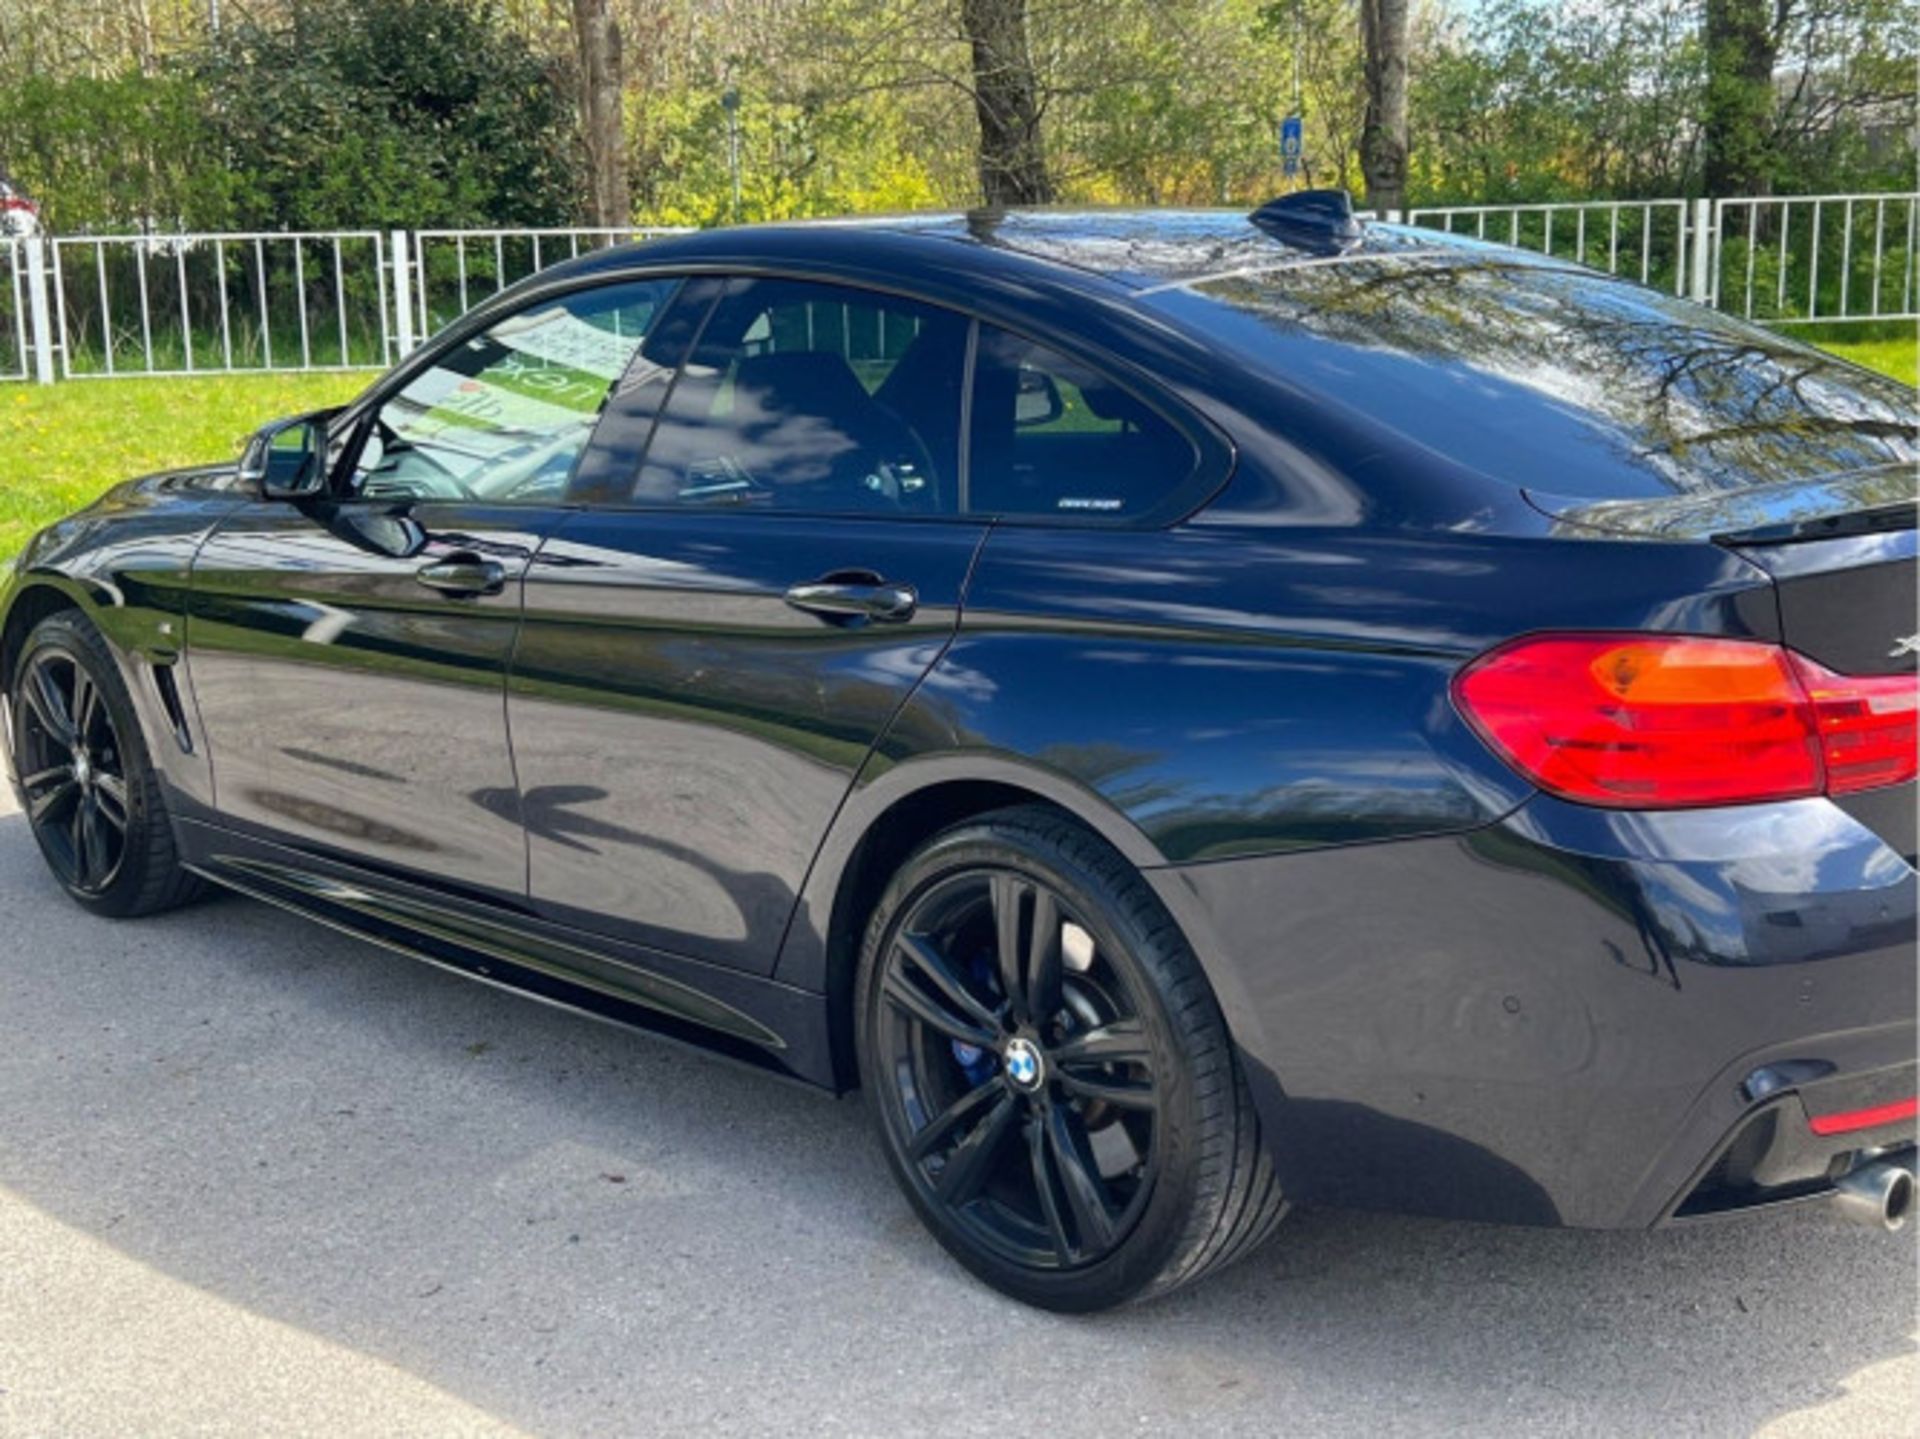 BMW 4 SERIES GRAN COUPE 3.0 430D M SPORT AUTO XDRIVE EURO 6 (S/S) 5DR (2016) - Image 23 of 73